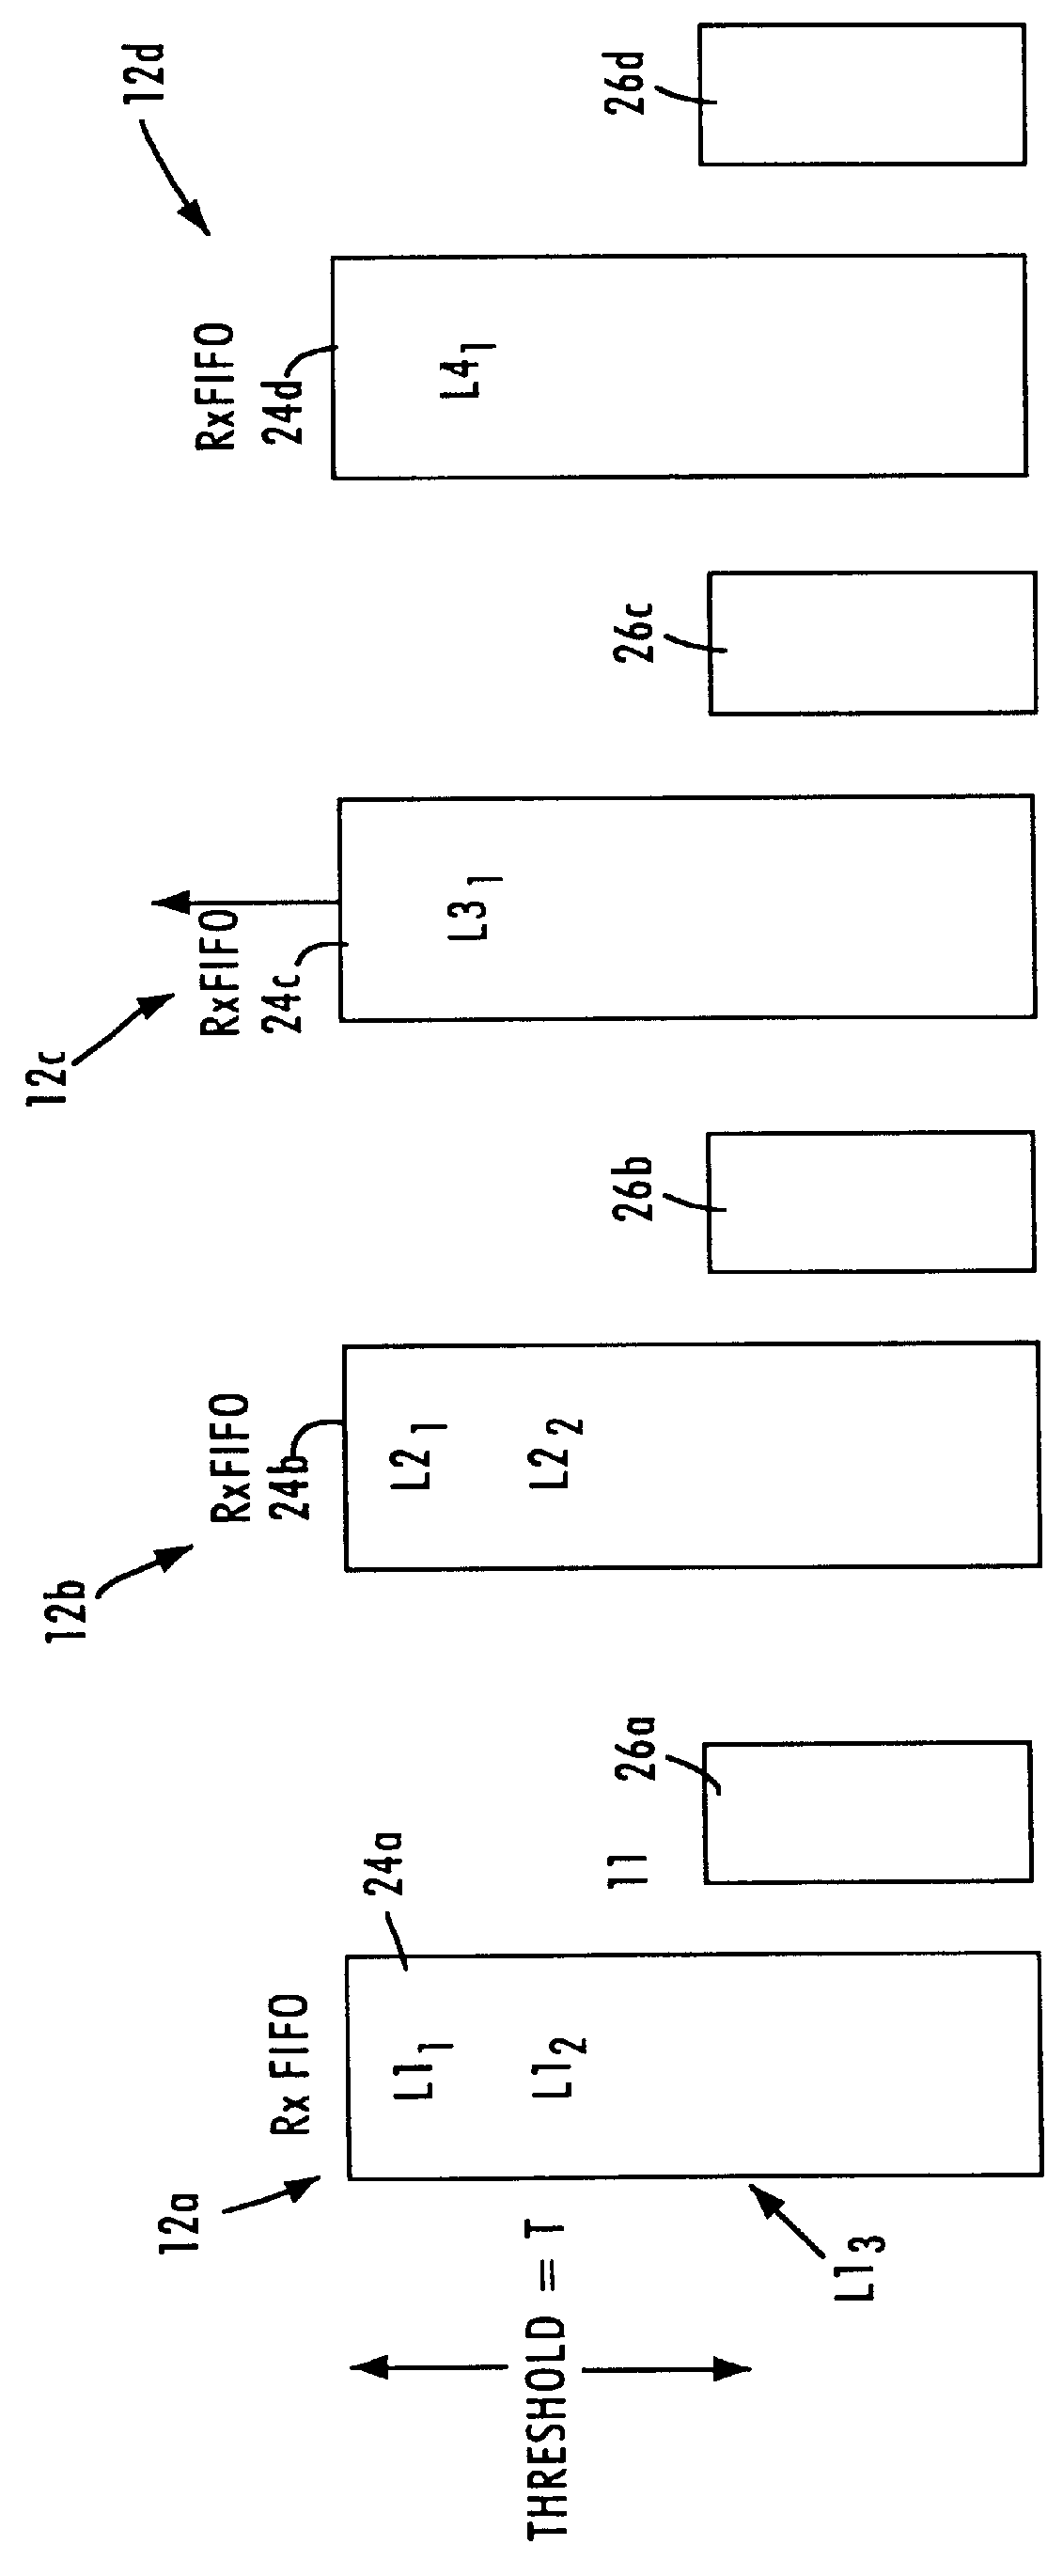 Apparatus and method for generating a pause frame in a buffered distributor based on lengths of data packets distributed according to a round robin repeater arbitration